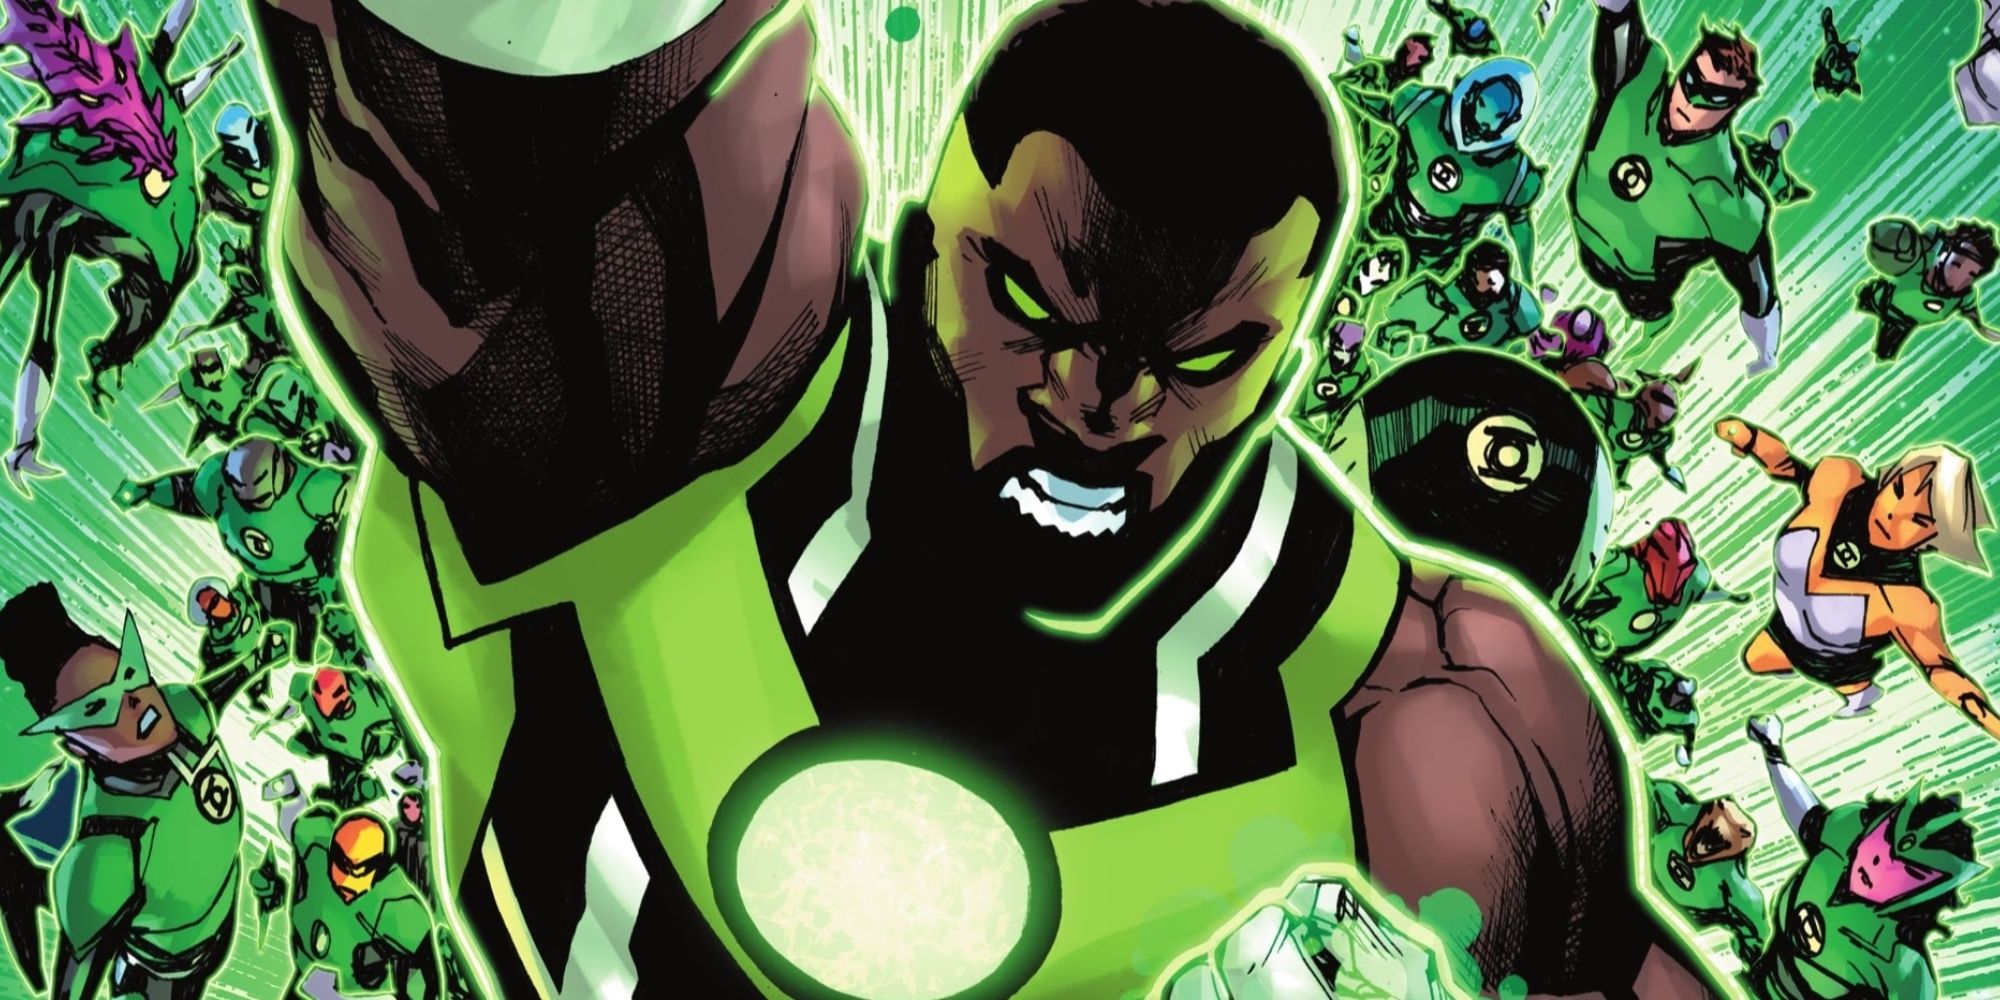 Green Lantern is Officially A God, as DC's New Emerald Knight Featured